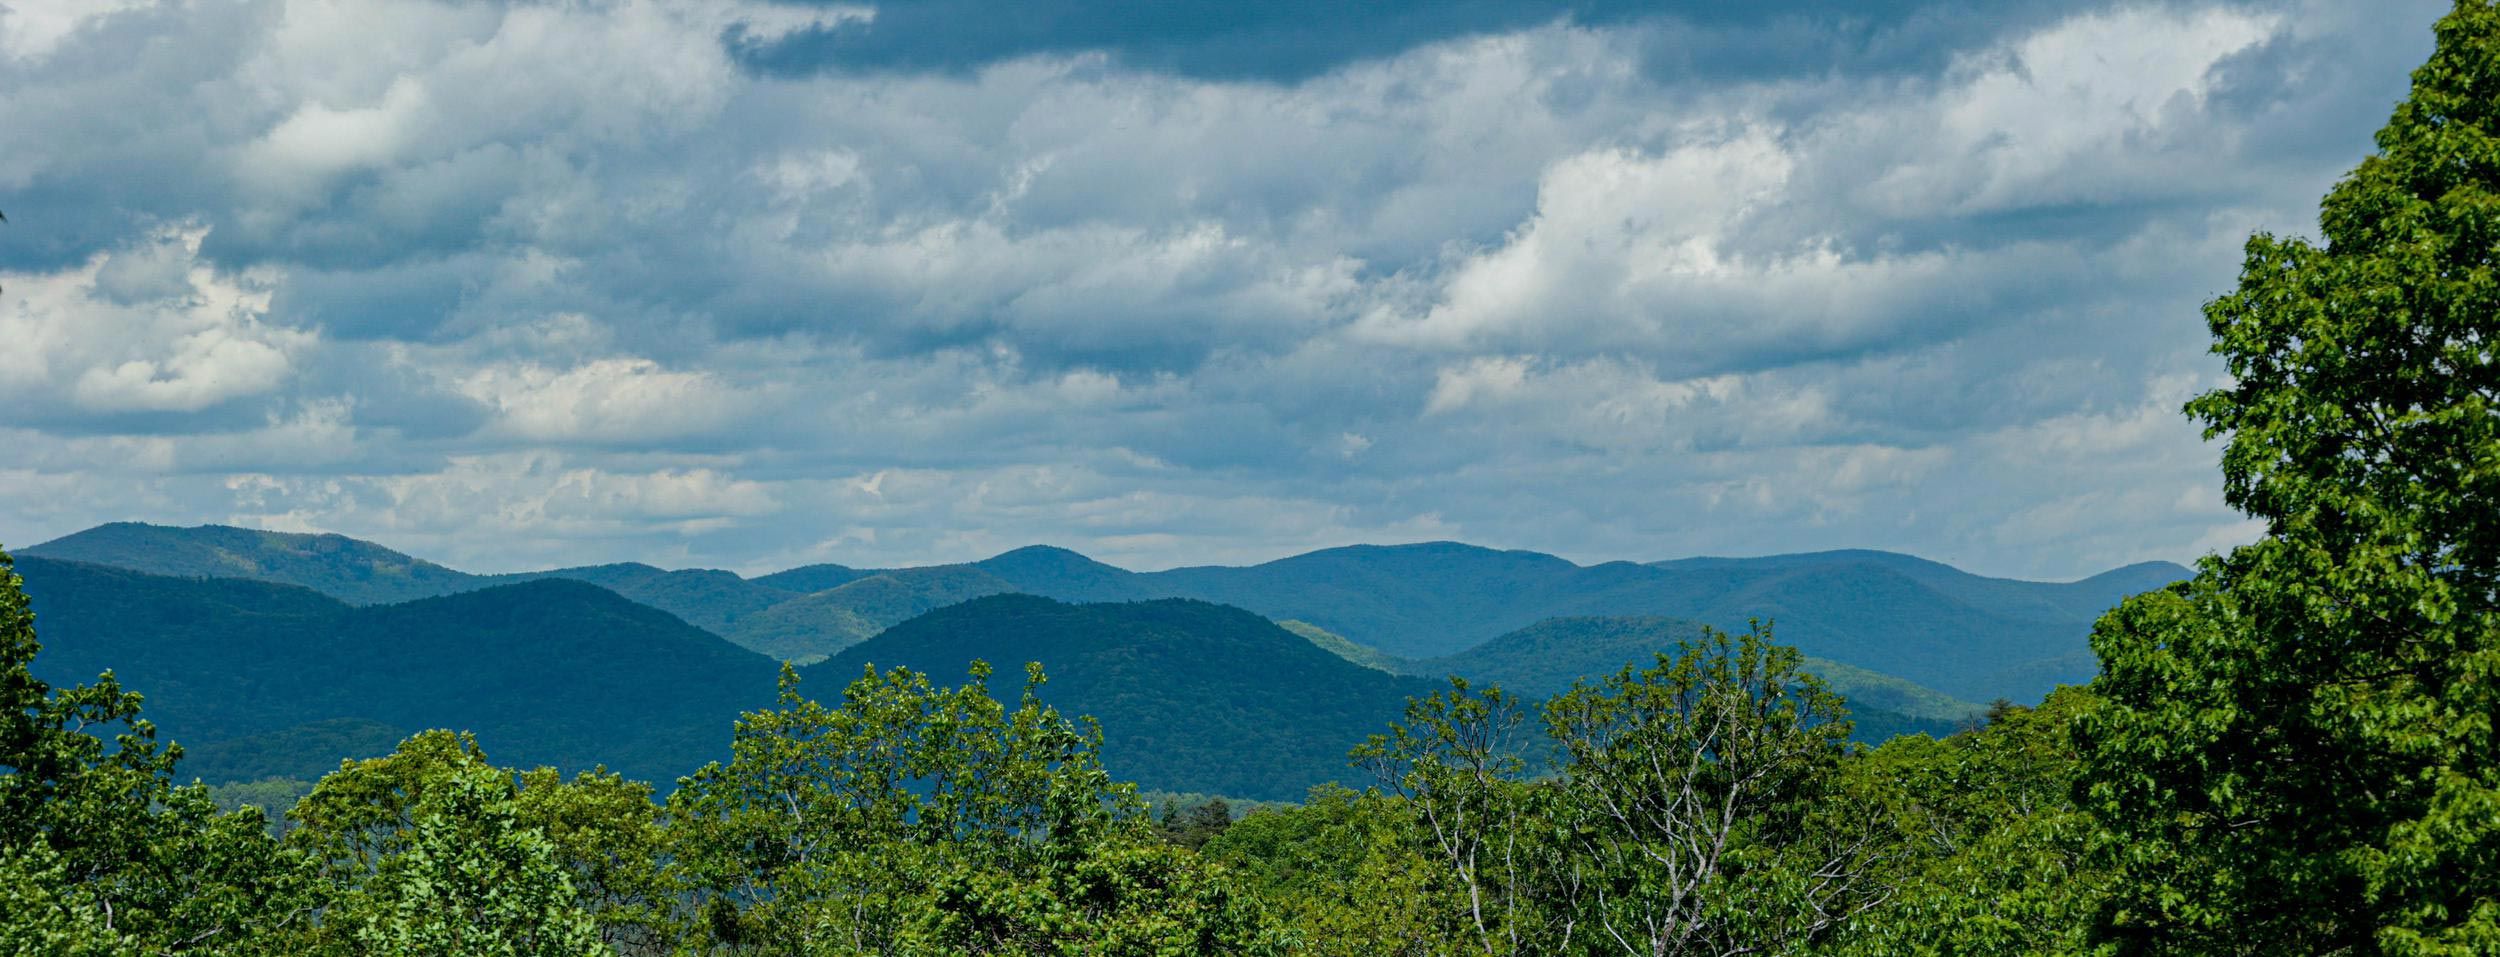 Find Real Estate in the North GA Mountains